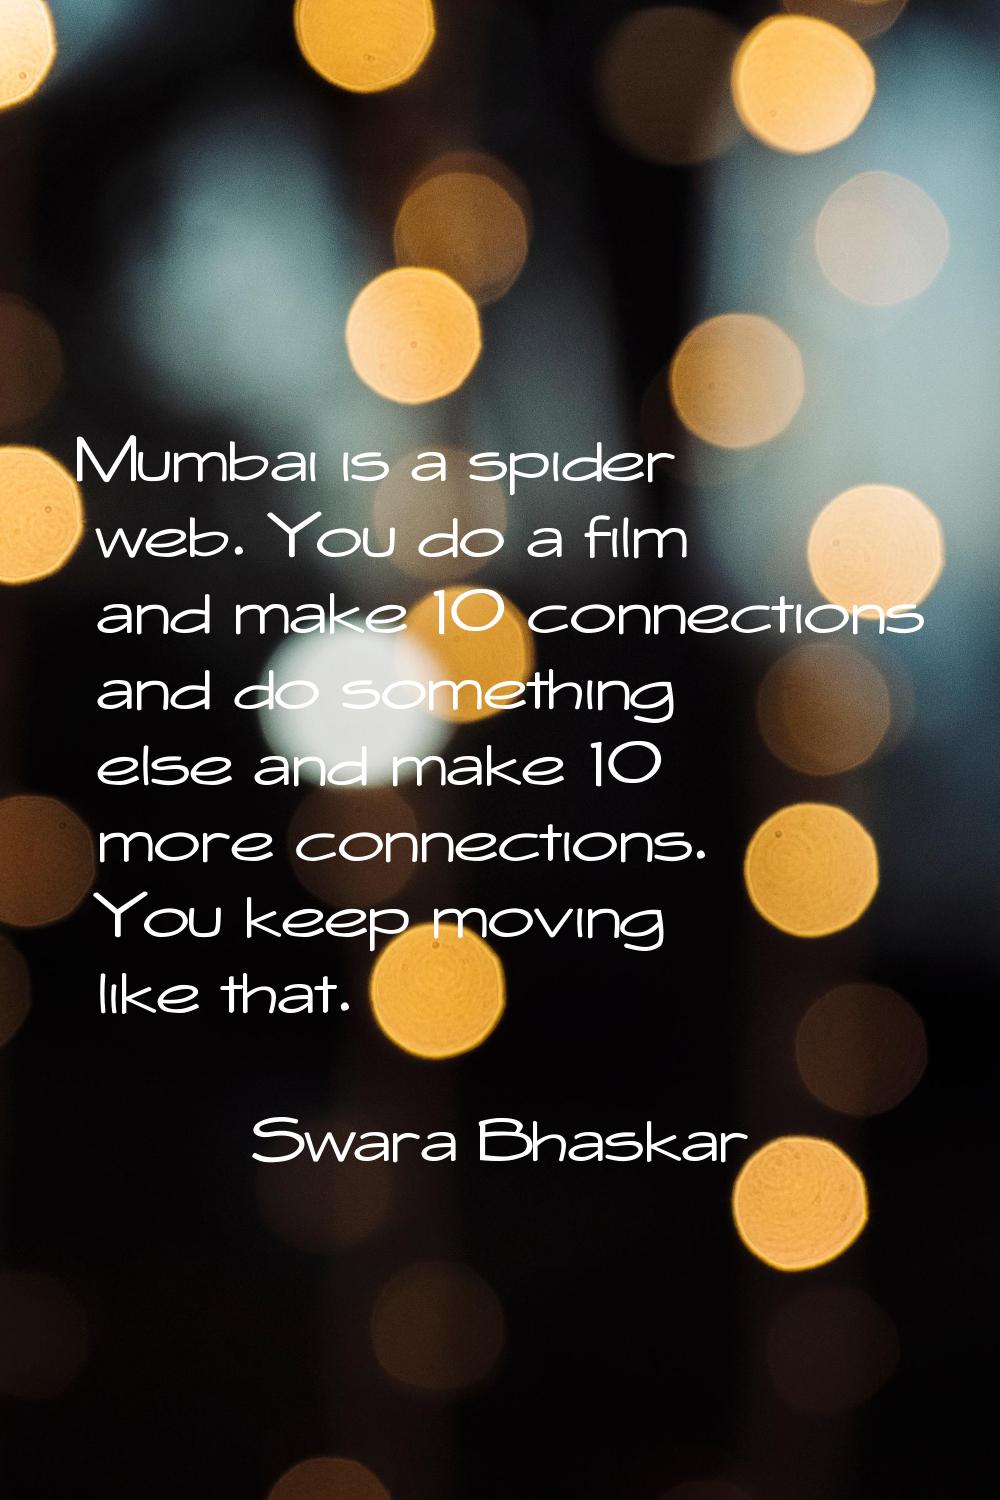 Mumbai is a spider web. You do a film and make 10 connections and do something else and make 10 mor